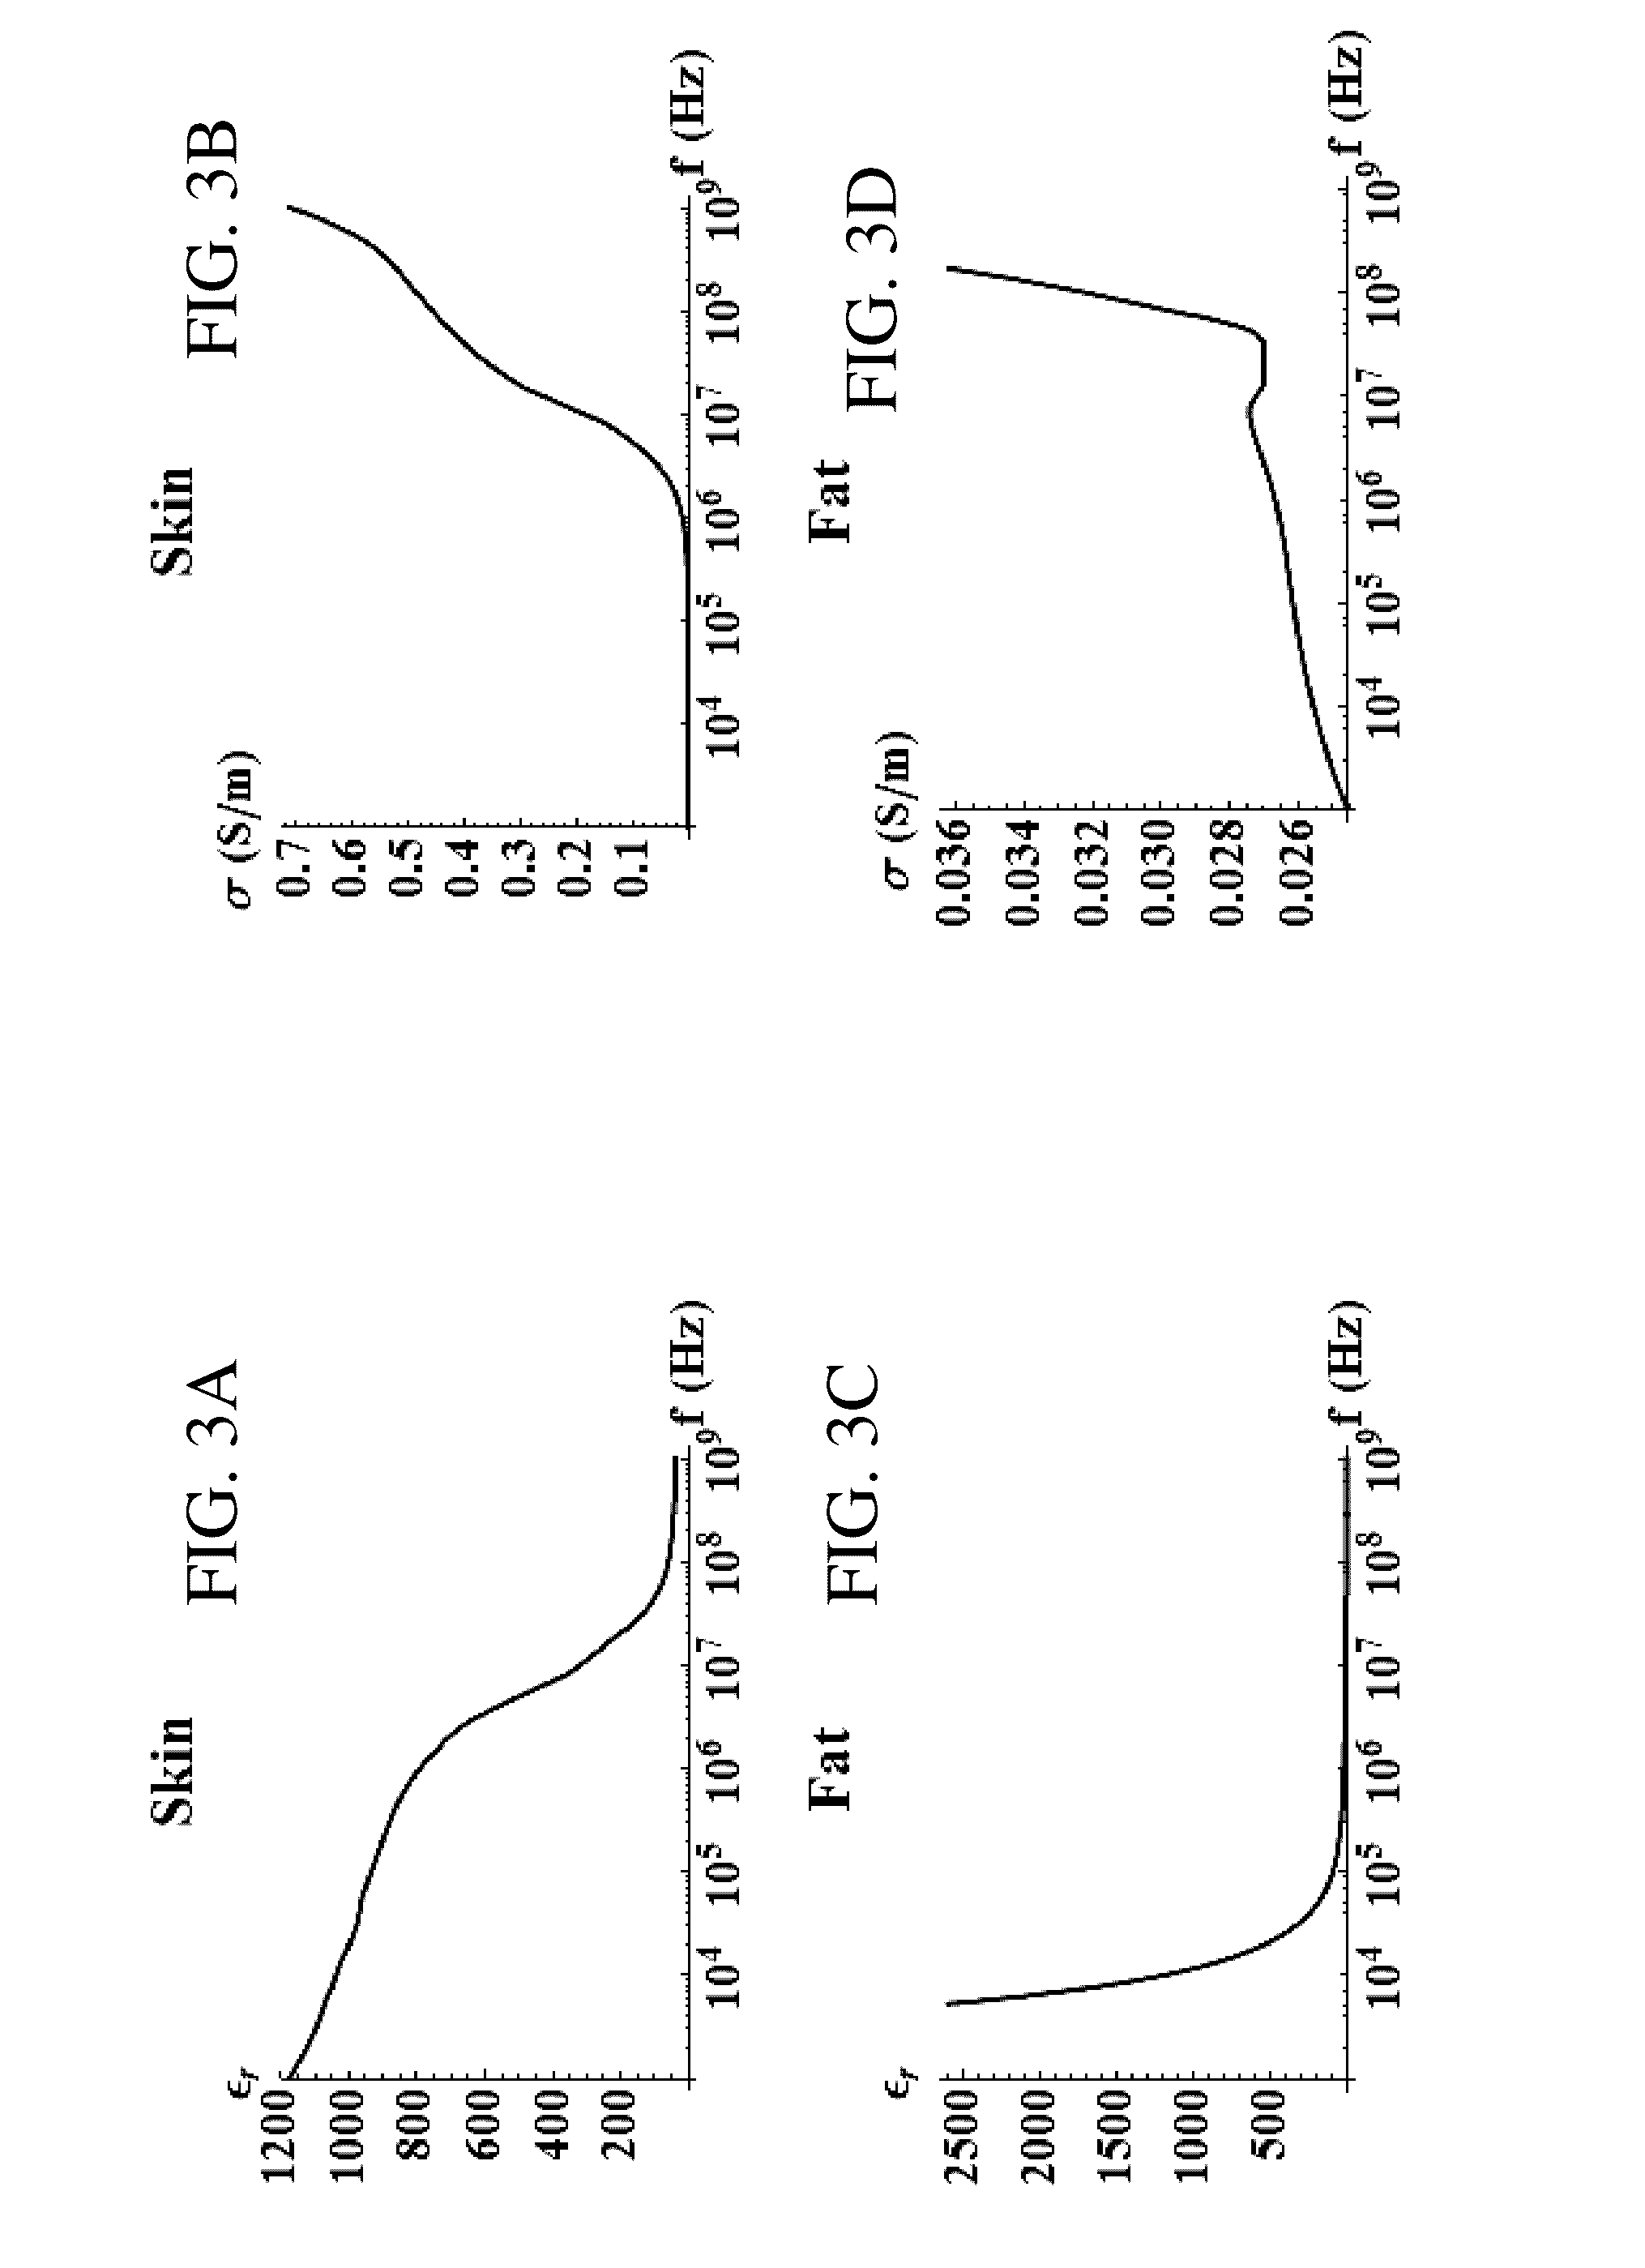 High frequency electroporation for cancer therapy